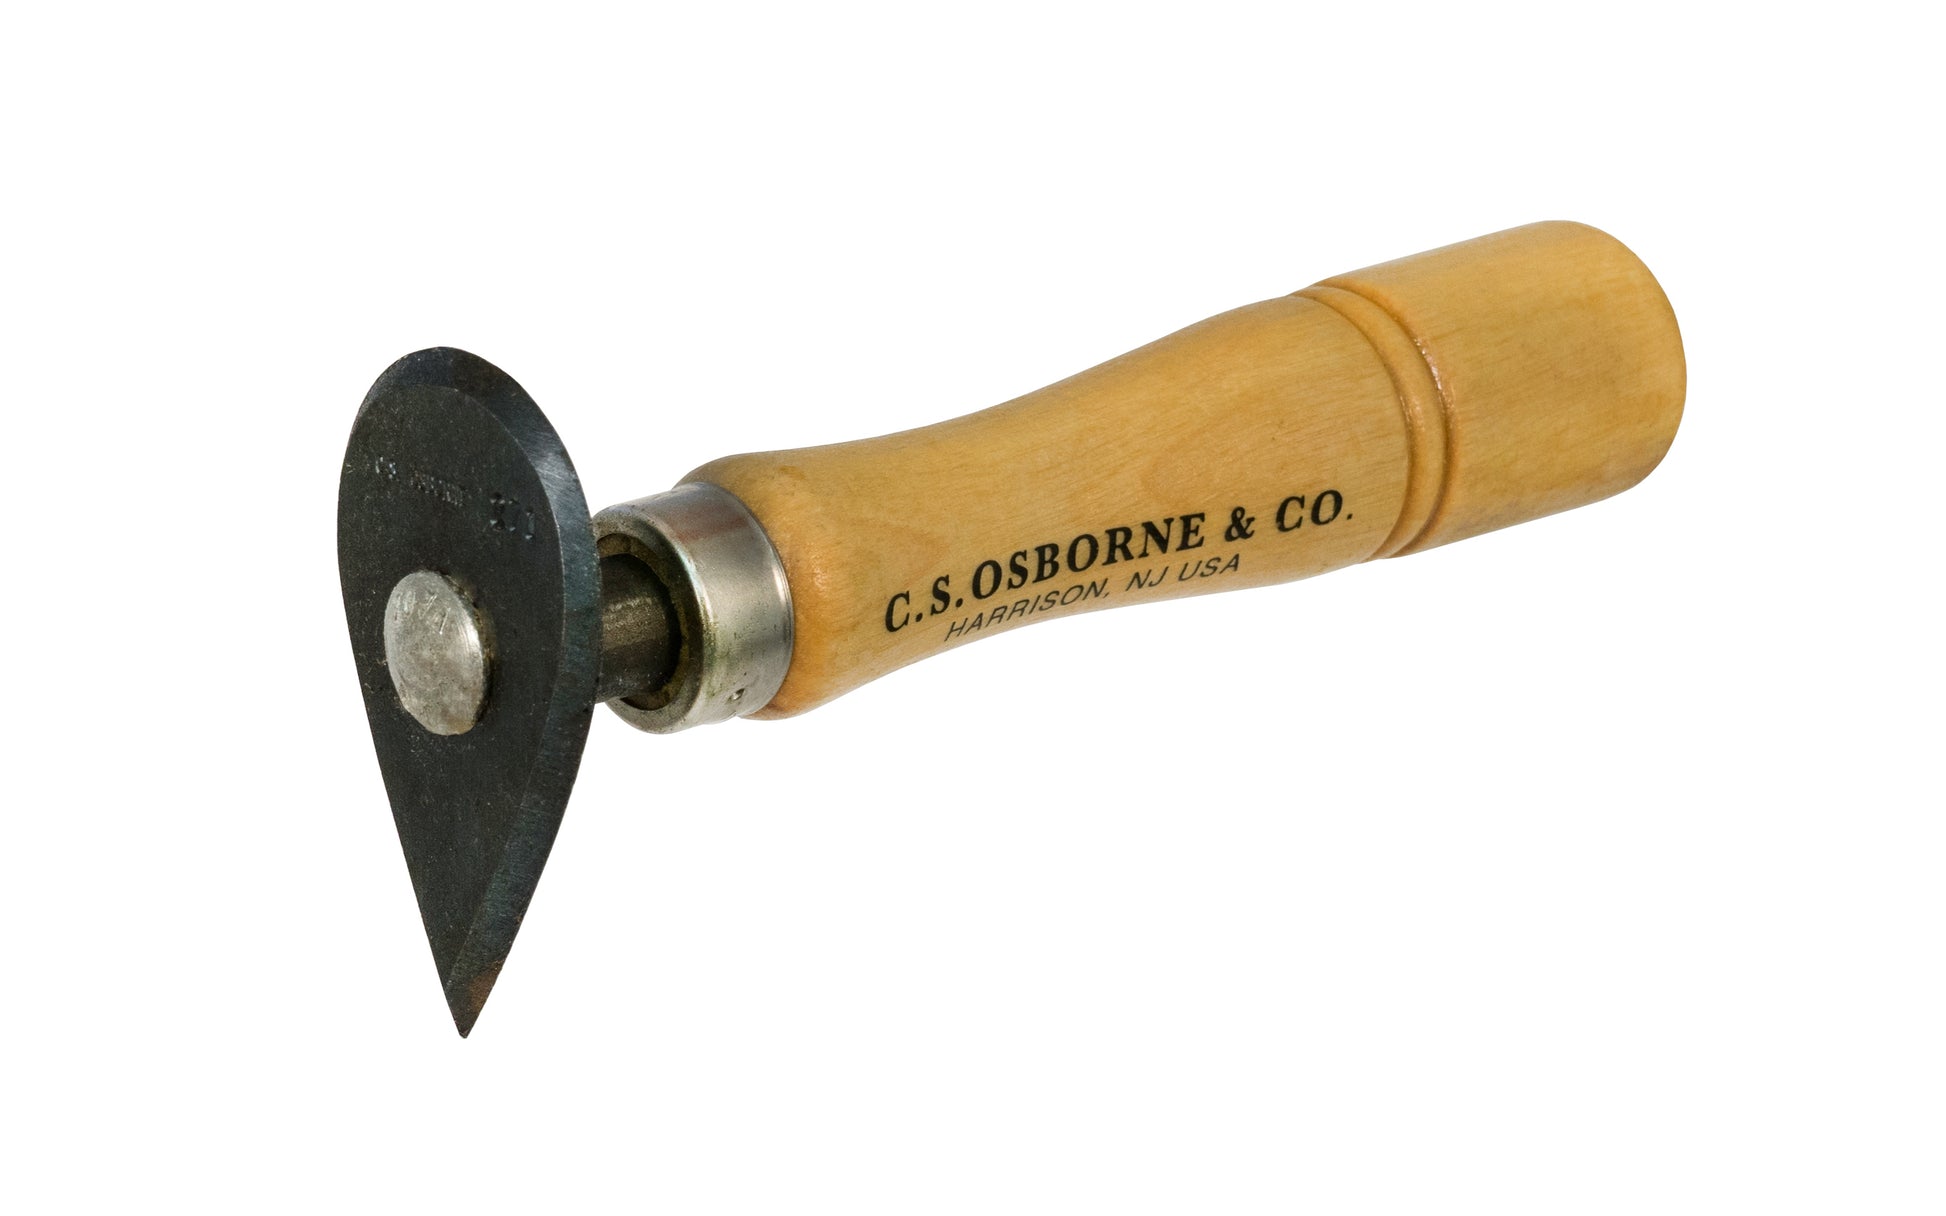 The CS Osborne Wood Scraper No. 271 has an oval & pointed shape scraper blade with a lacquered hardwood handle with nickel-plated ferrule. Made in USA ~ 096685591360